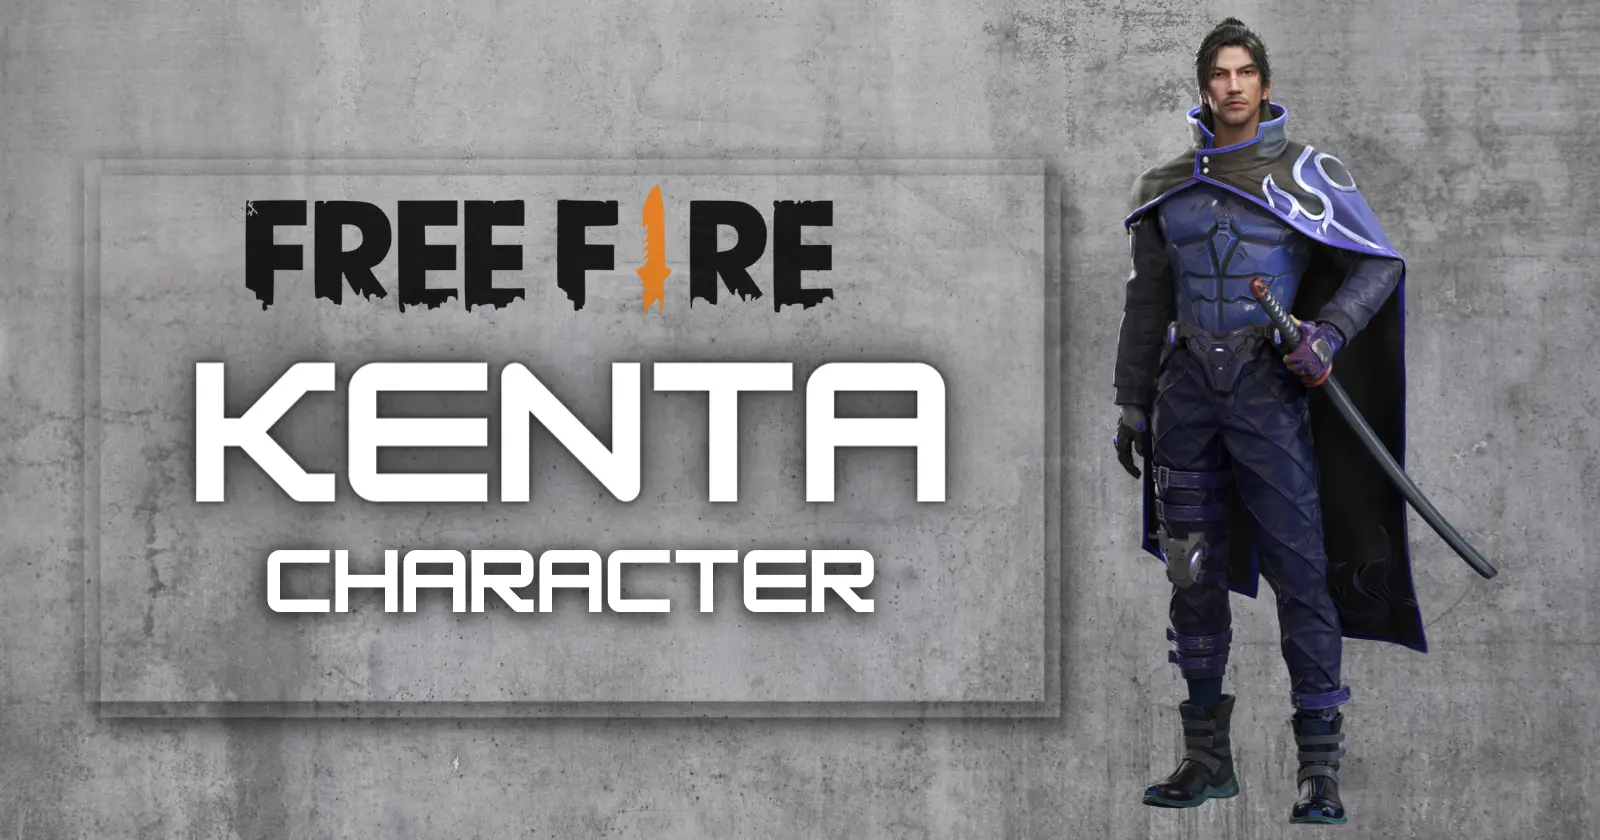 free fire kenta character ability, story and more